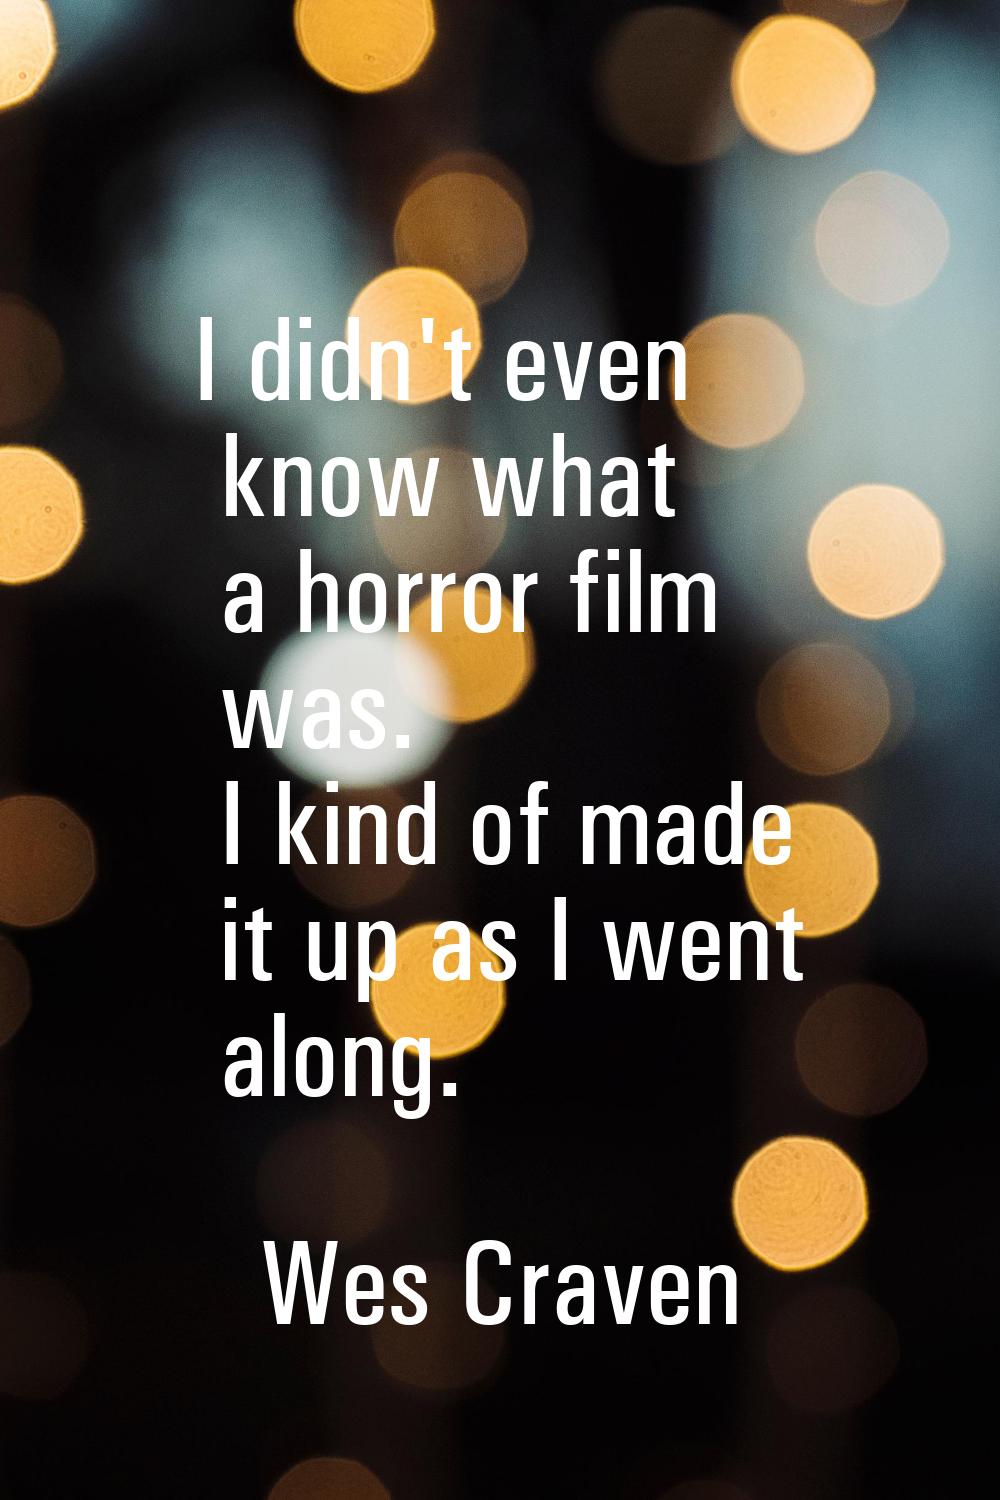 I didn't even know what a horror film was. I kind of made it up as I went along.